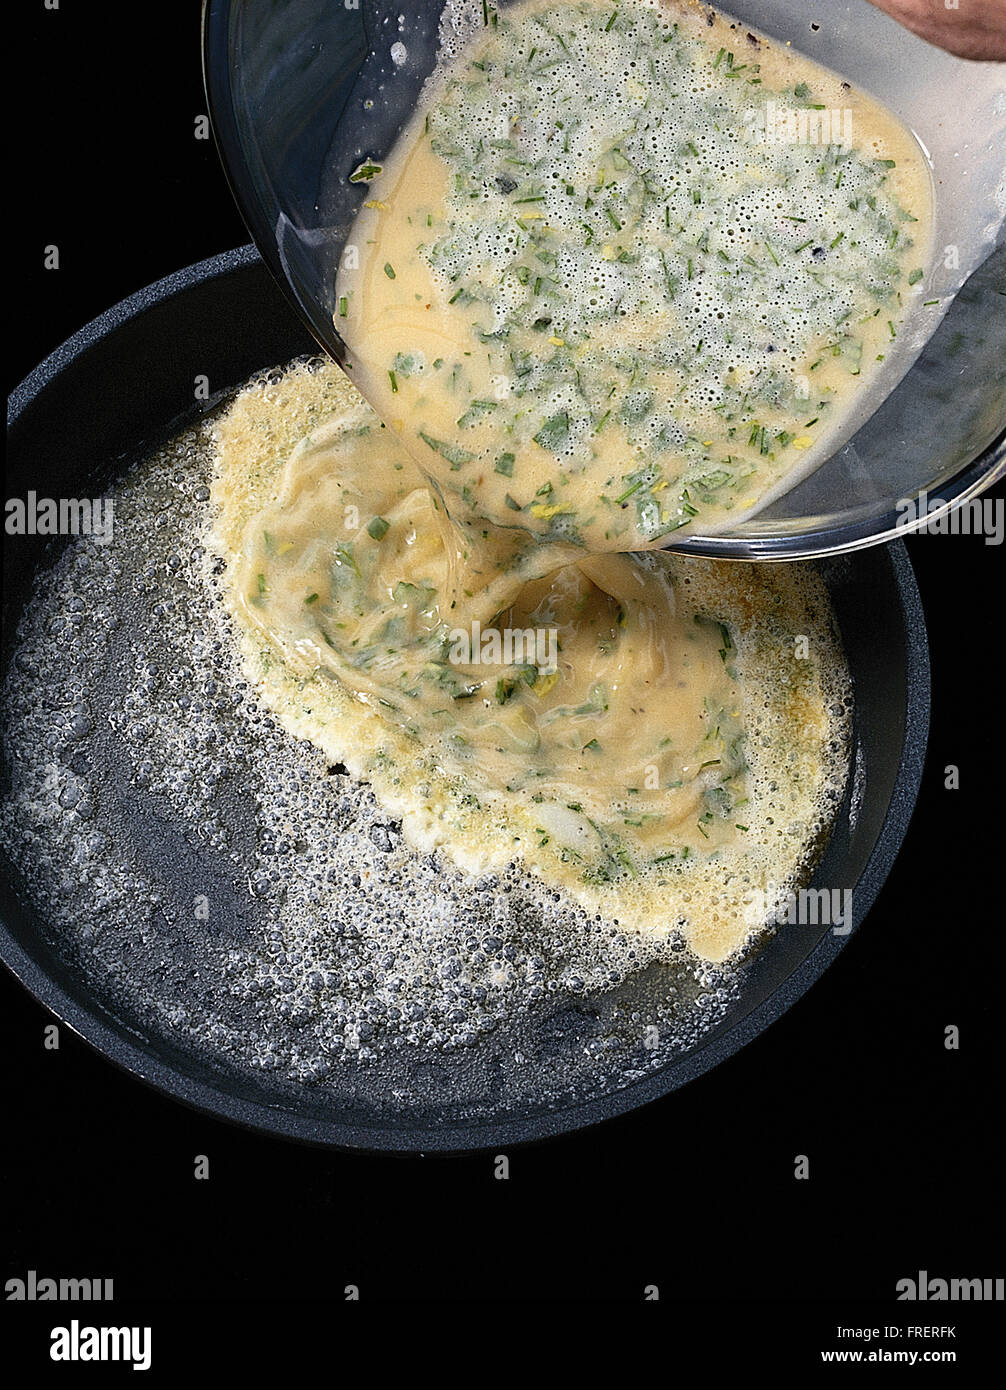 Classic french omelette: 3, egg mixture being poured into the pan. Stock Photo